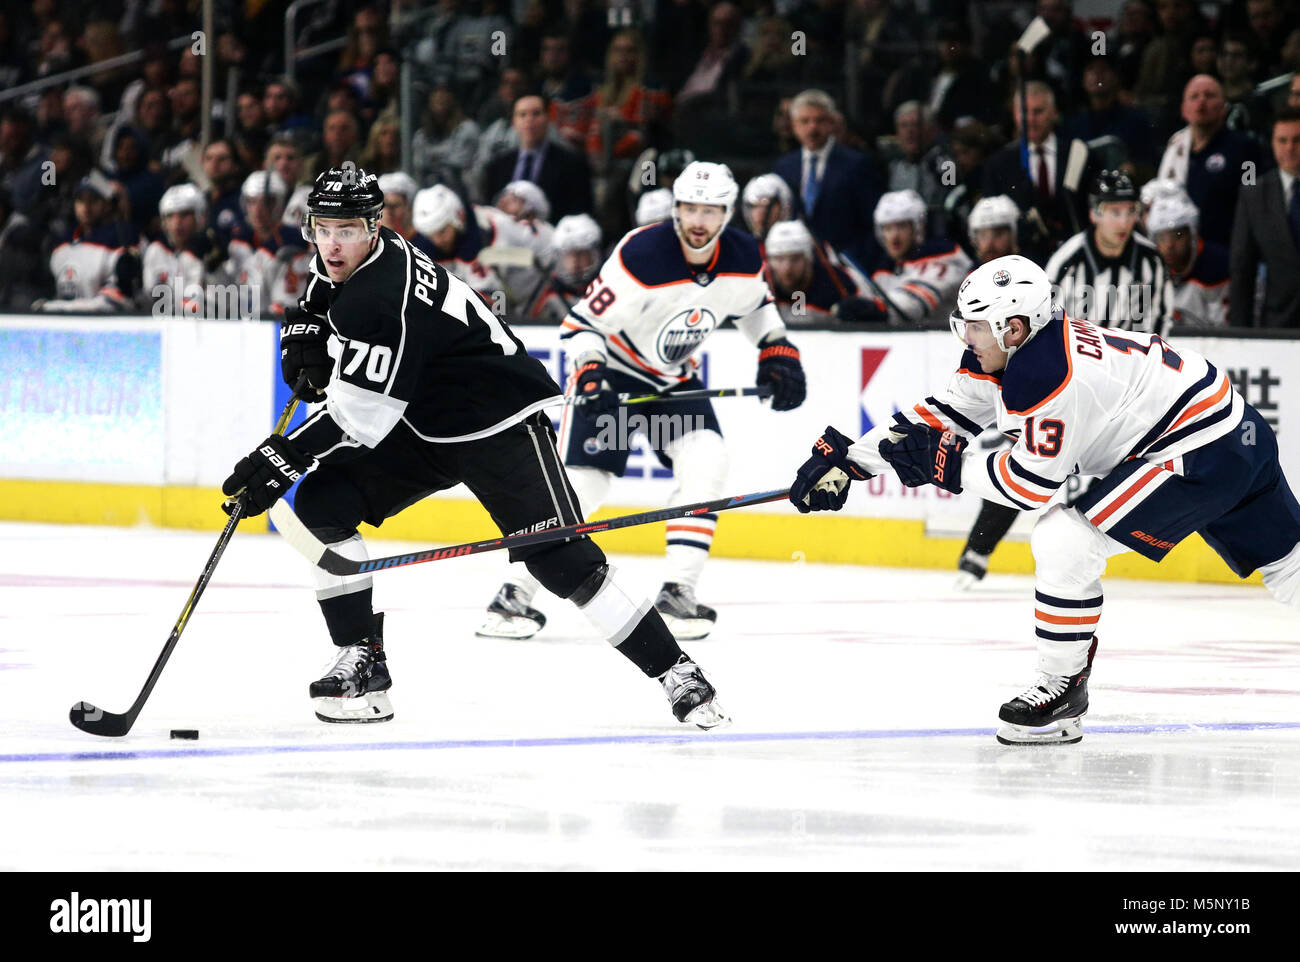 Los Angeles, California, USA. 24th Feb, 2018. Los Angeles Kings' forward Tanner Pearson (70) and Edmonton Oilers' forward Michael Cammalleri (13) in actions during a 2017-2018 NHL hockey game in Los Angeles, on Feb. 24, 2018. Edmonton Oilers won 4-3. Credit: Ringo Chiu/ZUMA Wire/Alamy Live News Stock Photo